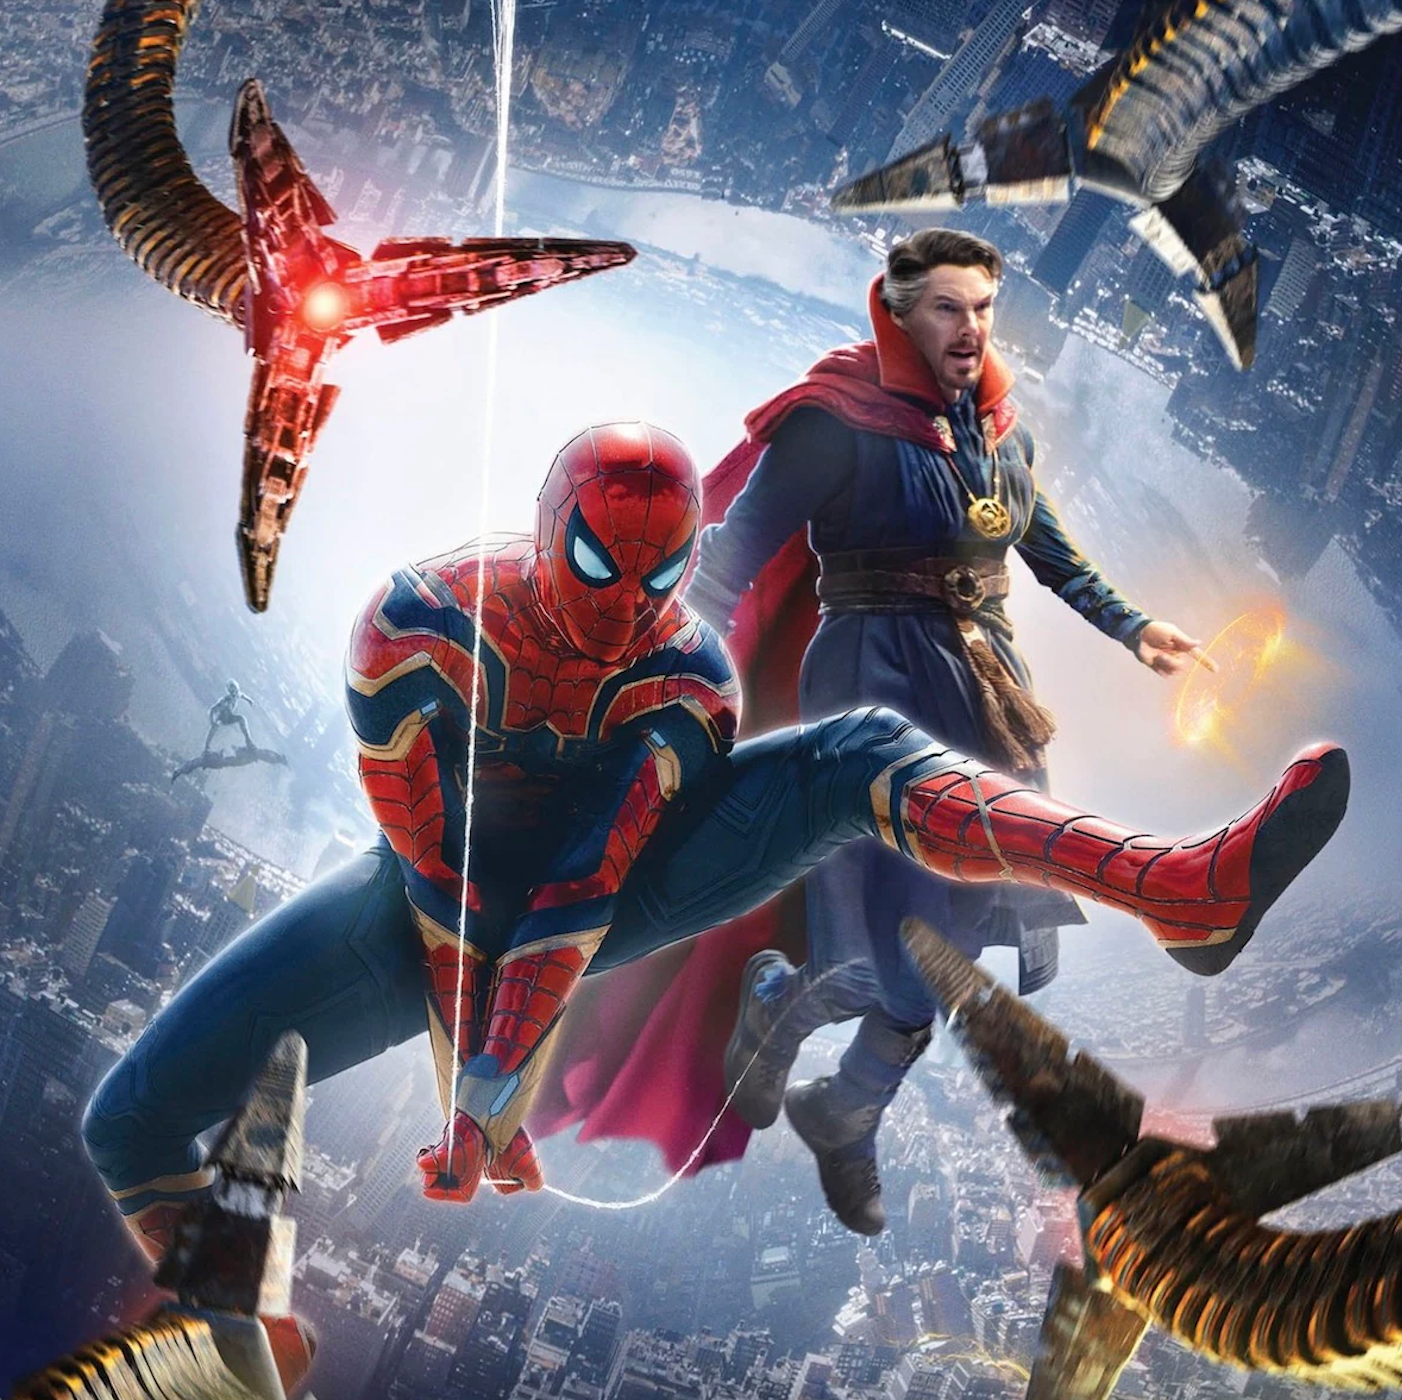 Watch Spider-Man™: Far From Home